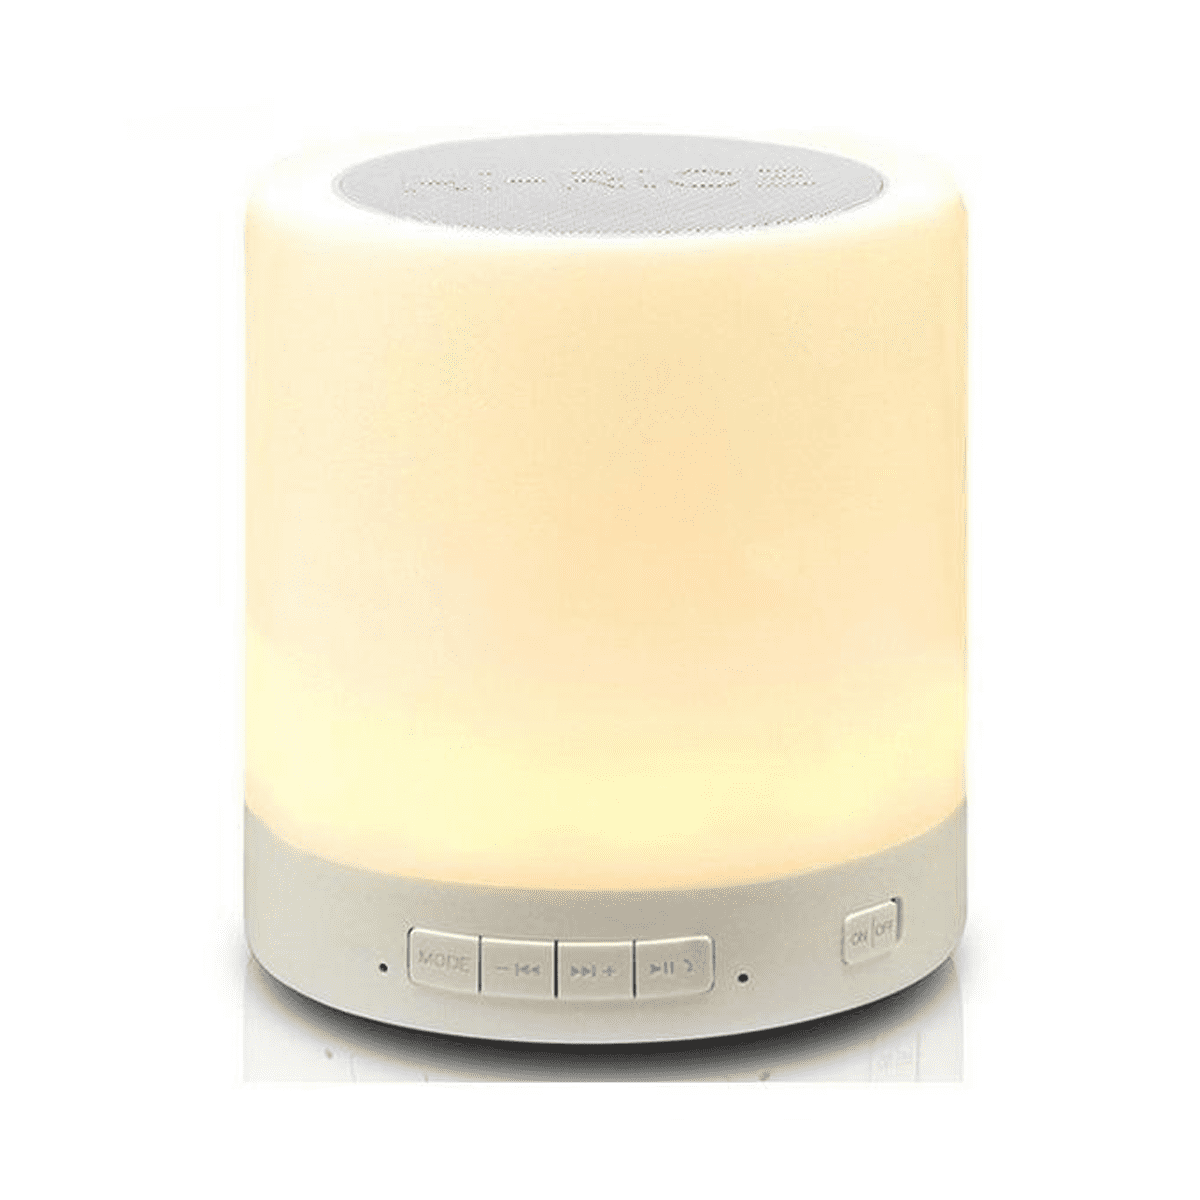 Touch Lamp with Portable Bluetooth Speaker